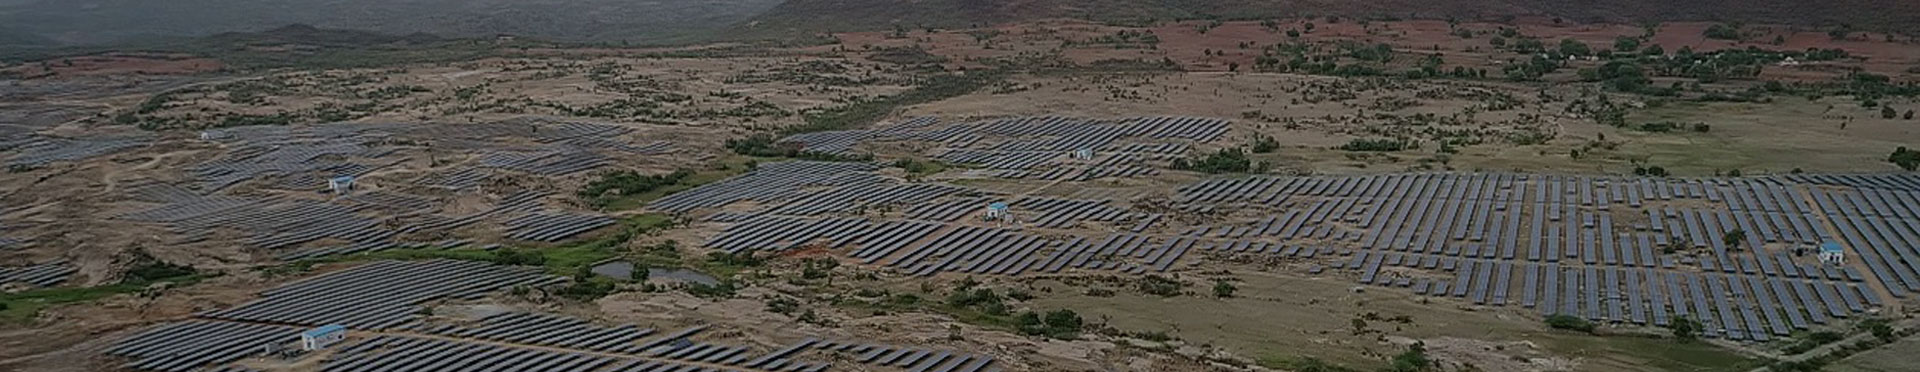 A Big Land With Solar Panels Near Mountains